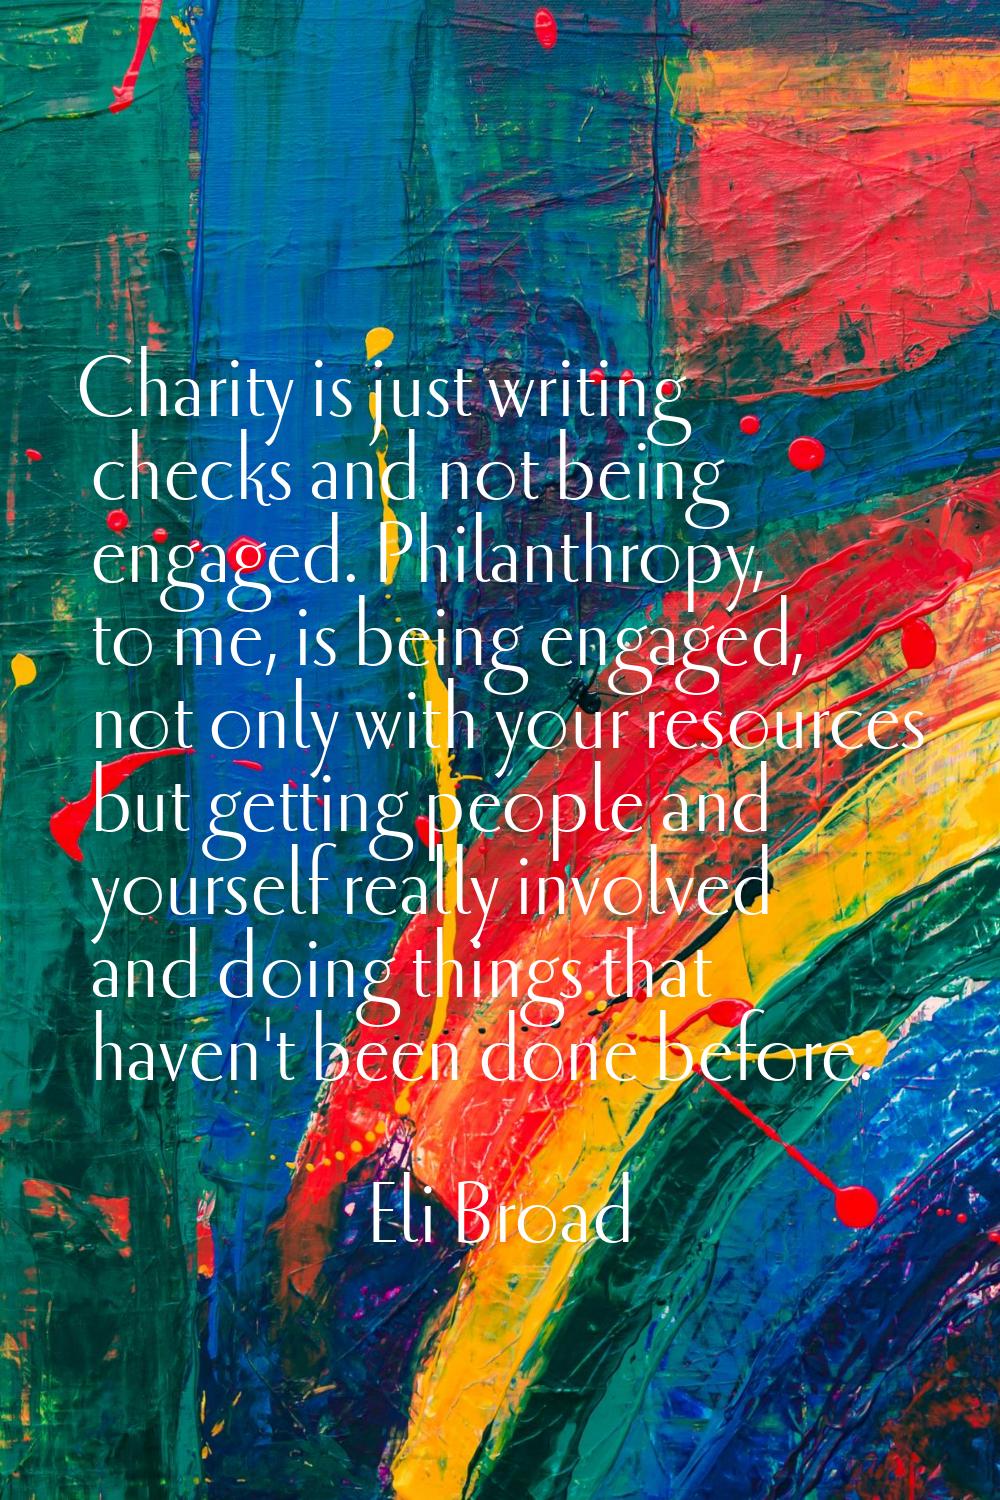 Charity is just writing checks and not being engaged. Philanthropy, to me, is being engaged, not on